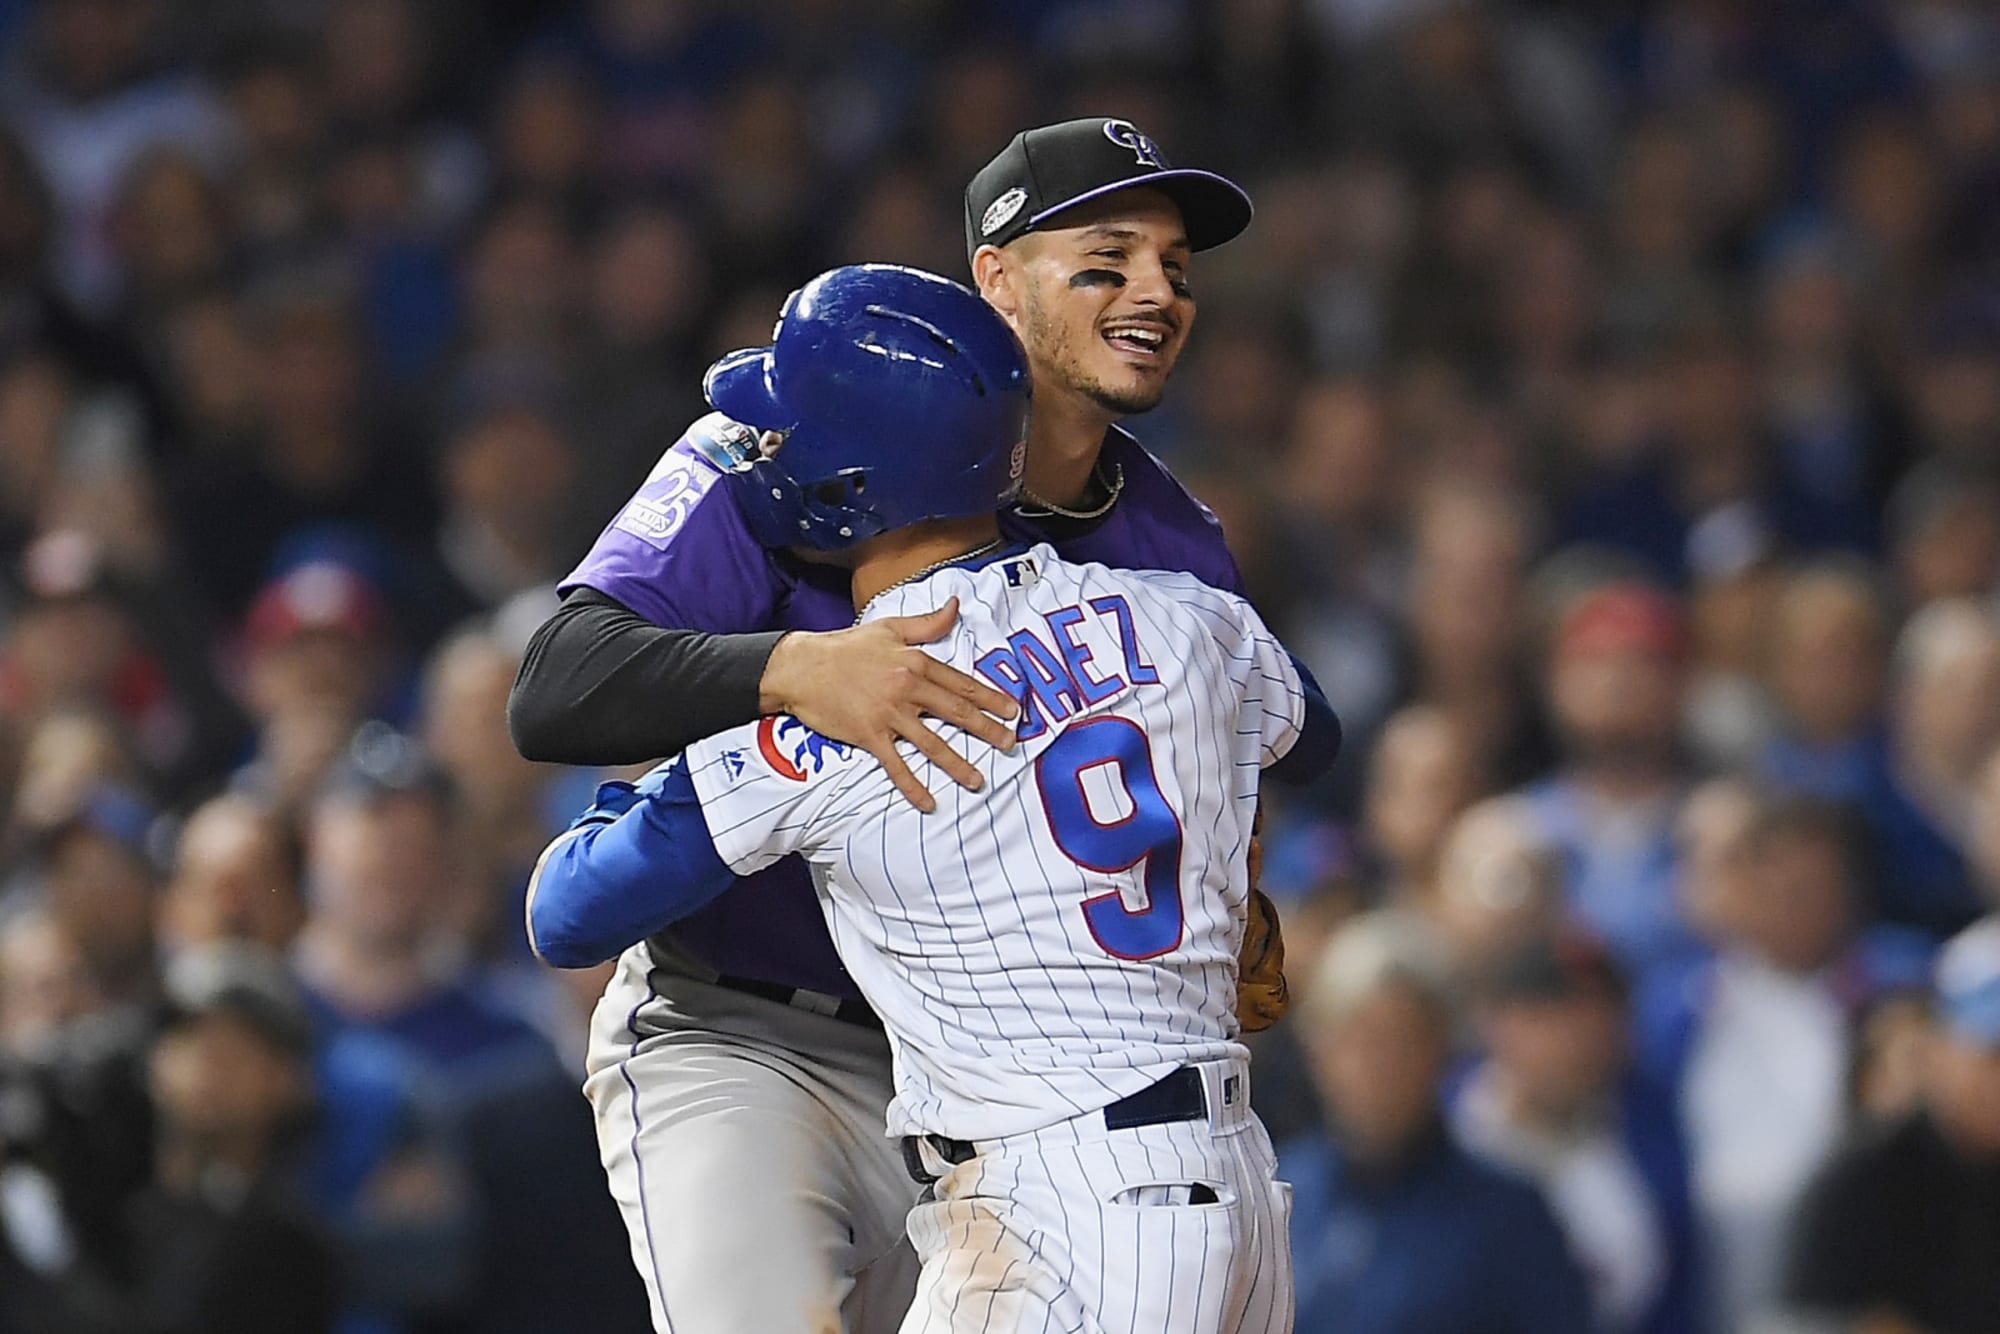 Cubs sign catcher Tony Wolters to one-year deal - Chicago Sun-Times